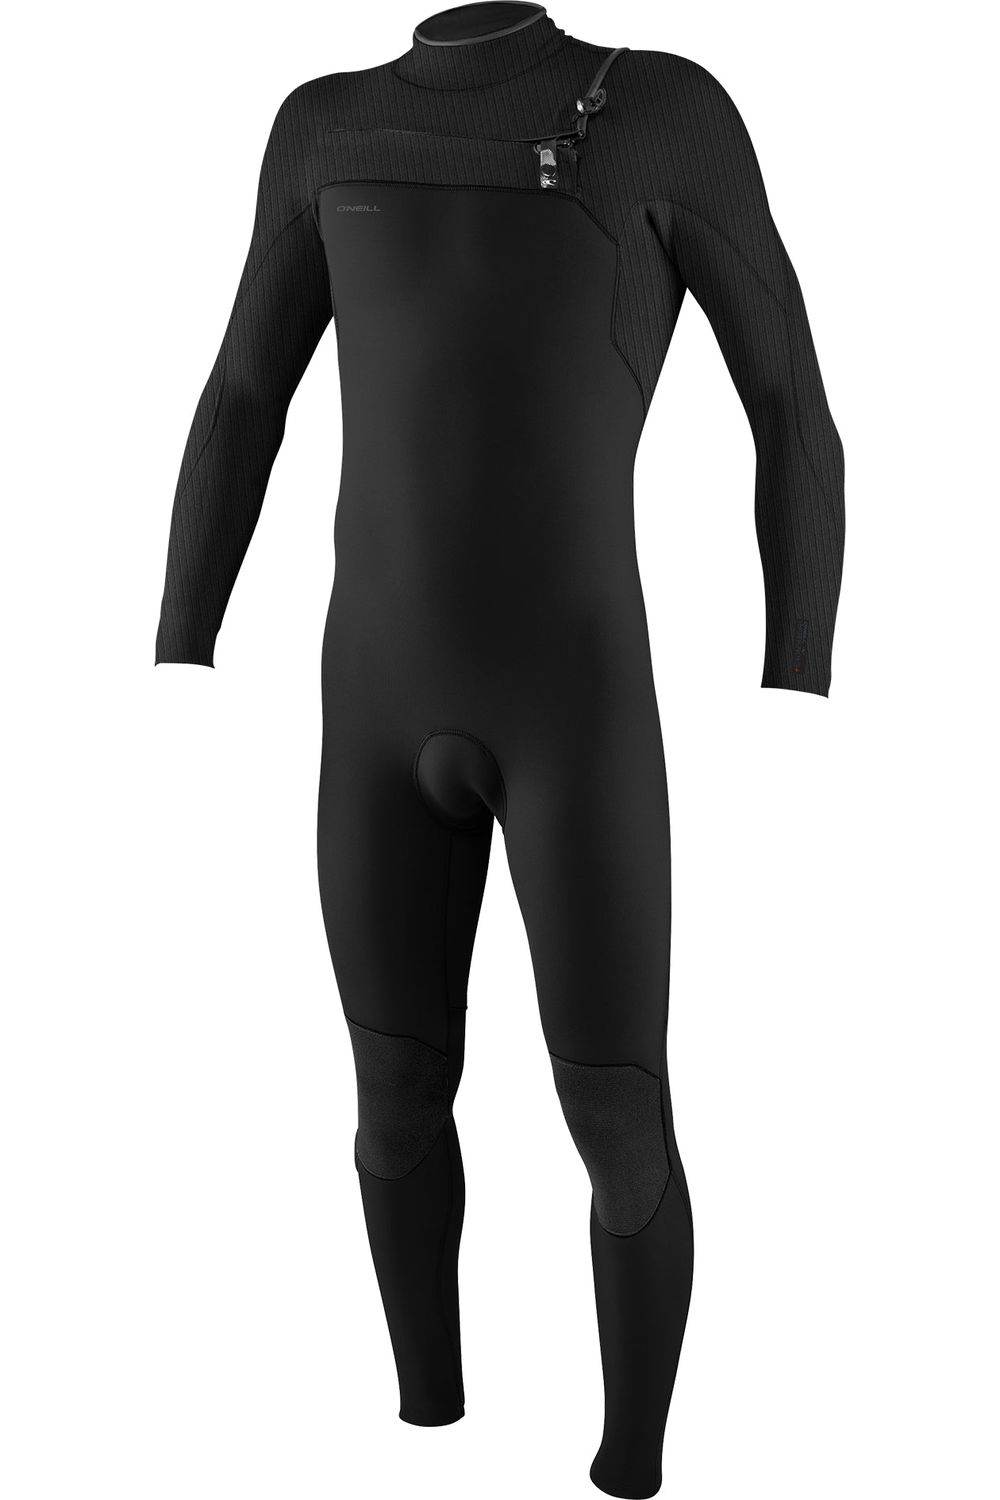 O'neill Hyperfreak Mens wetsuit 4/3+ from the front